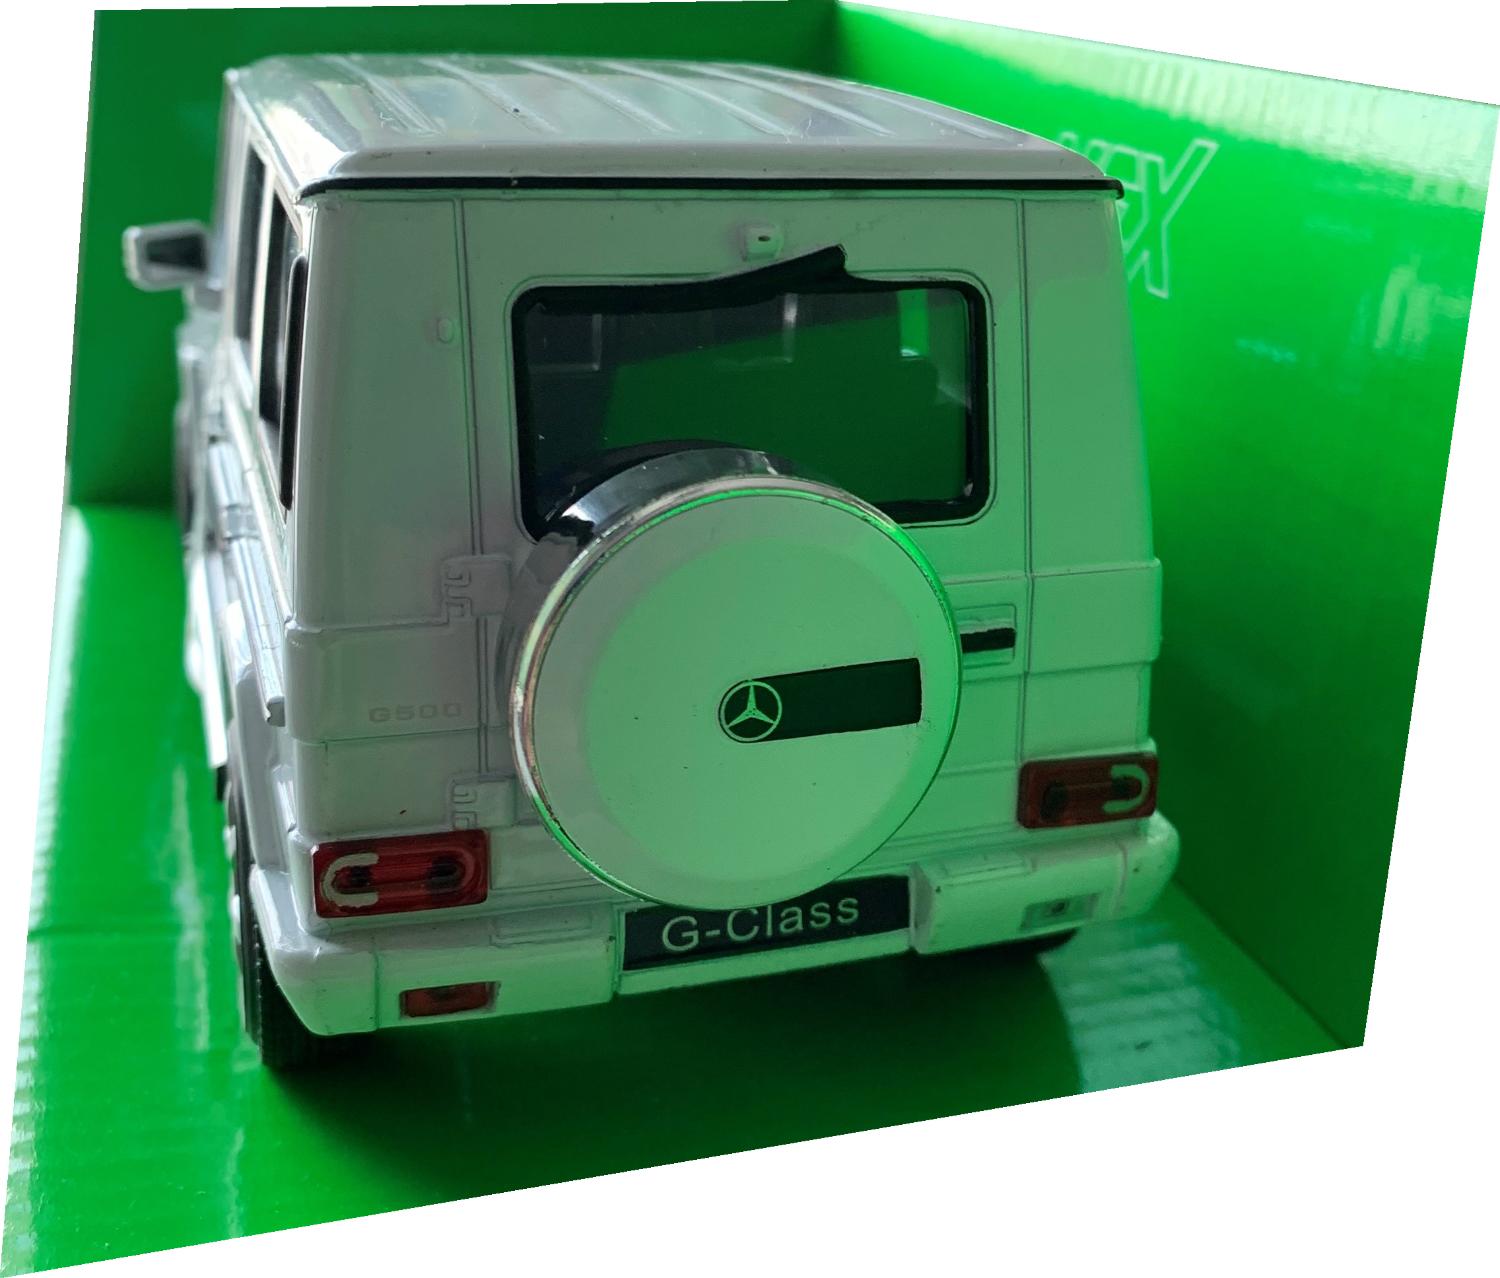 Mercedes Benz G Class, G500 V8 in white 1:24 scale model from Welly